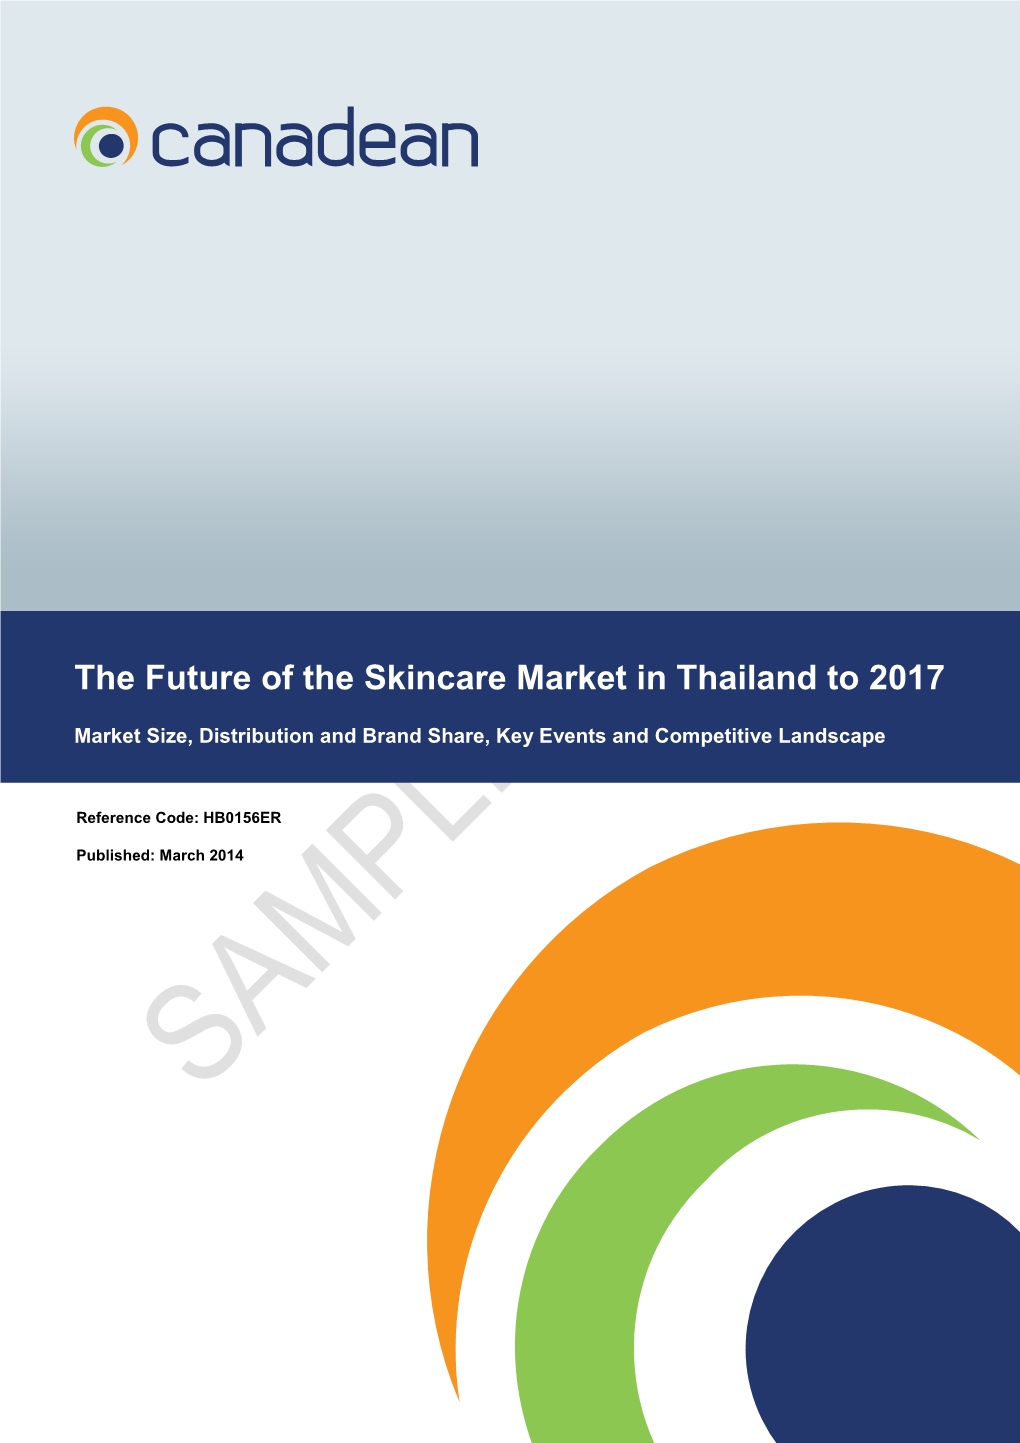 The Future of the Skincare Market in Thailand to 2017